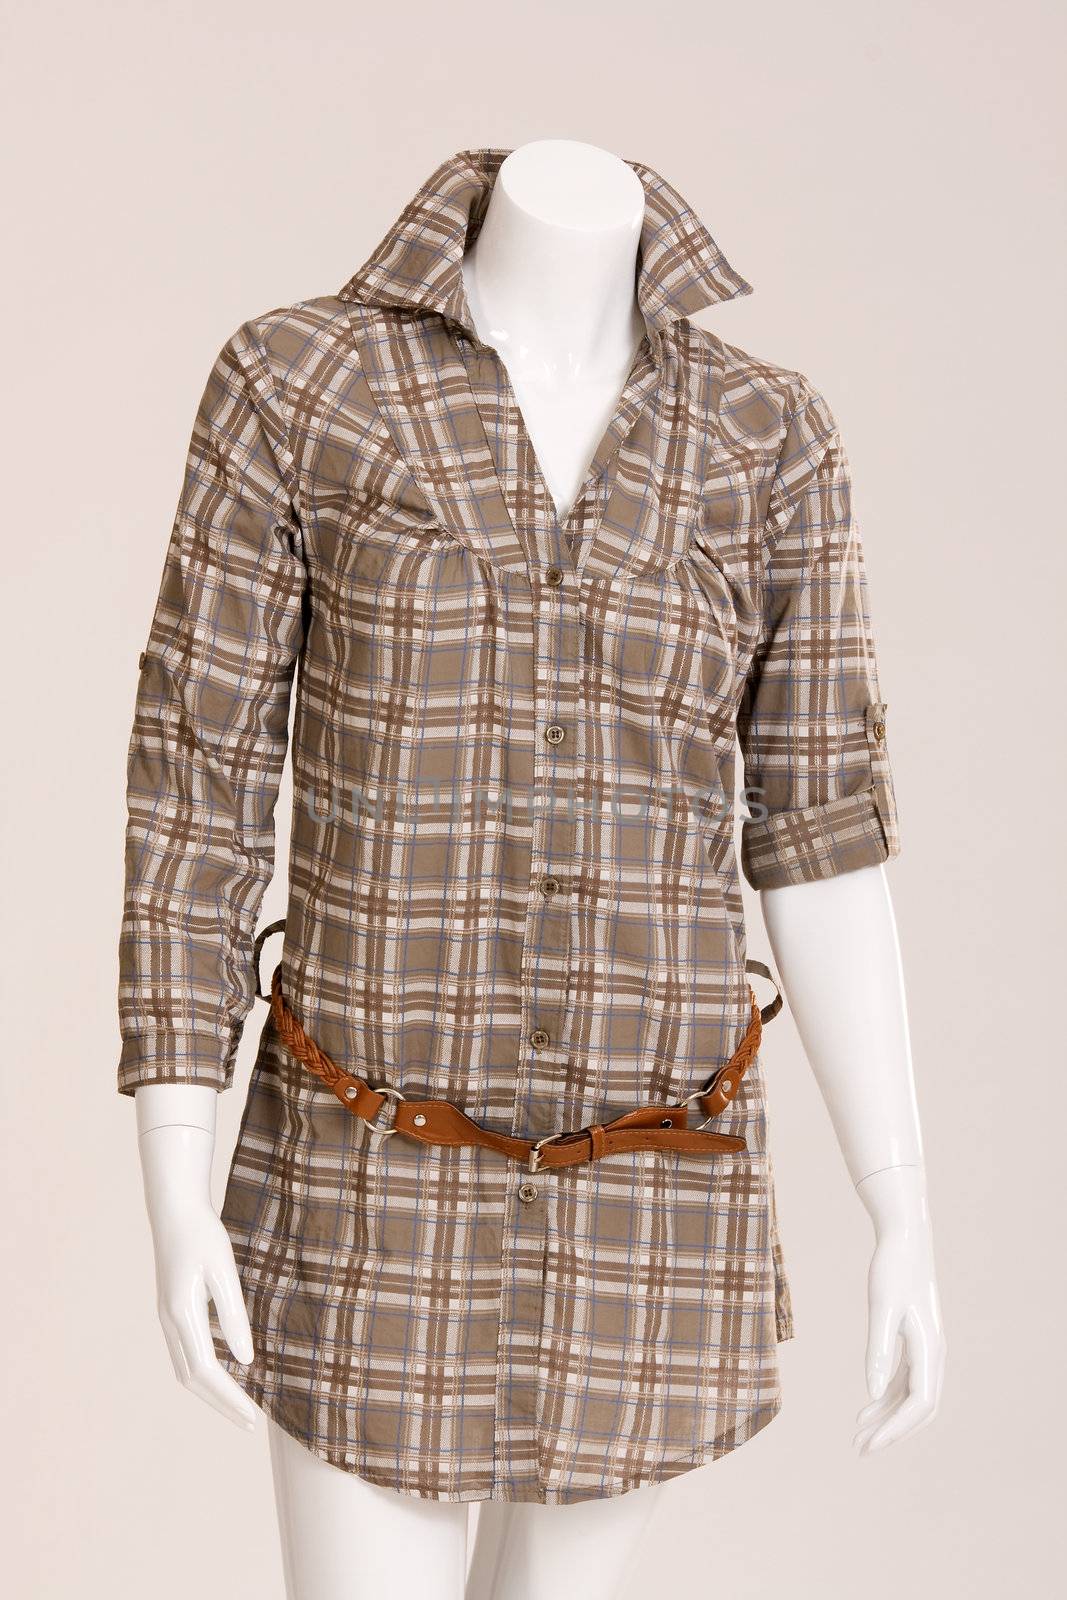 Brown checkered blouse with a brown belt on a mannequin